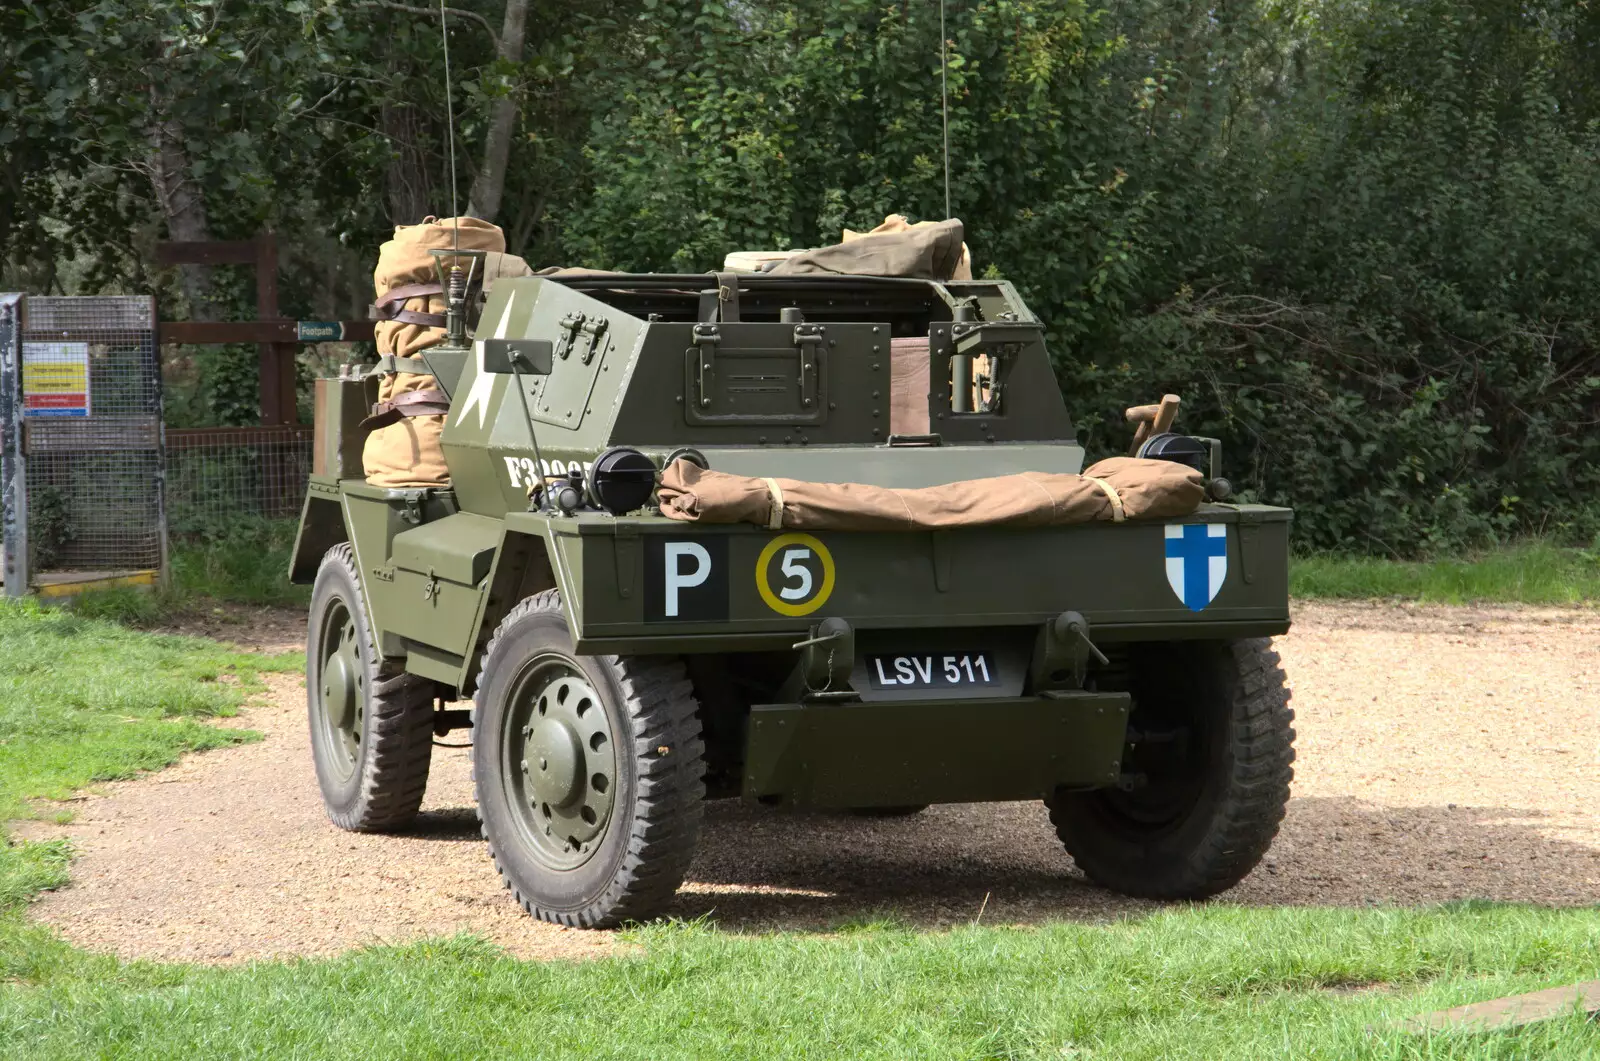 There's a US army vehicle in the car park, from Camping at Three Rivers, Geldeston, Norfolk - 5th September 2020